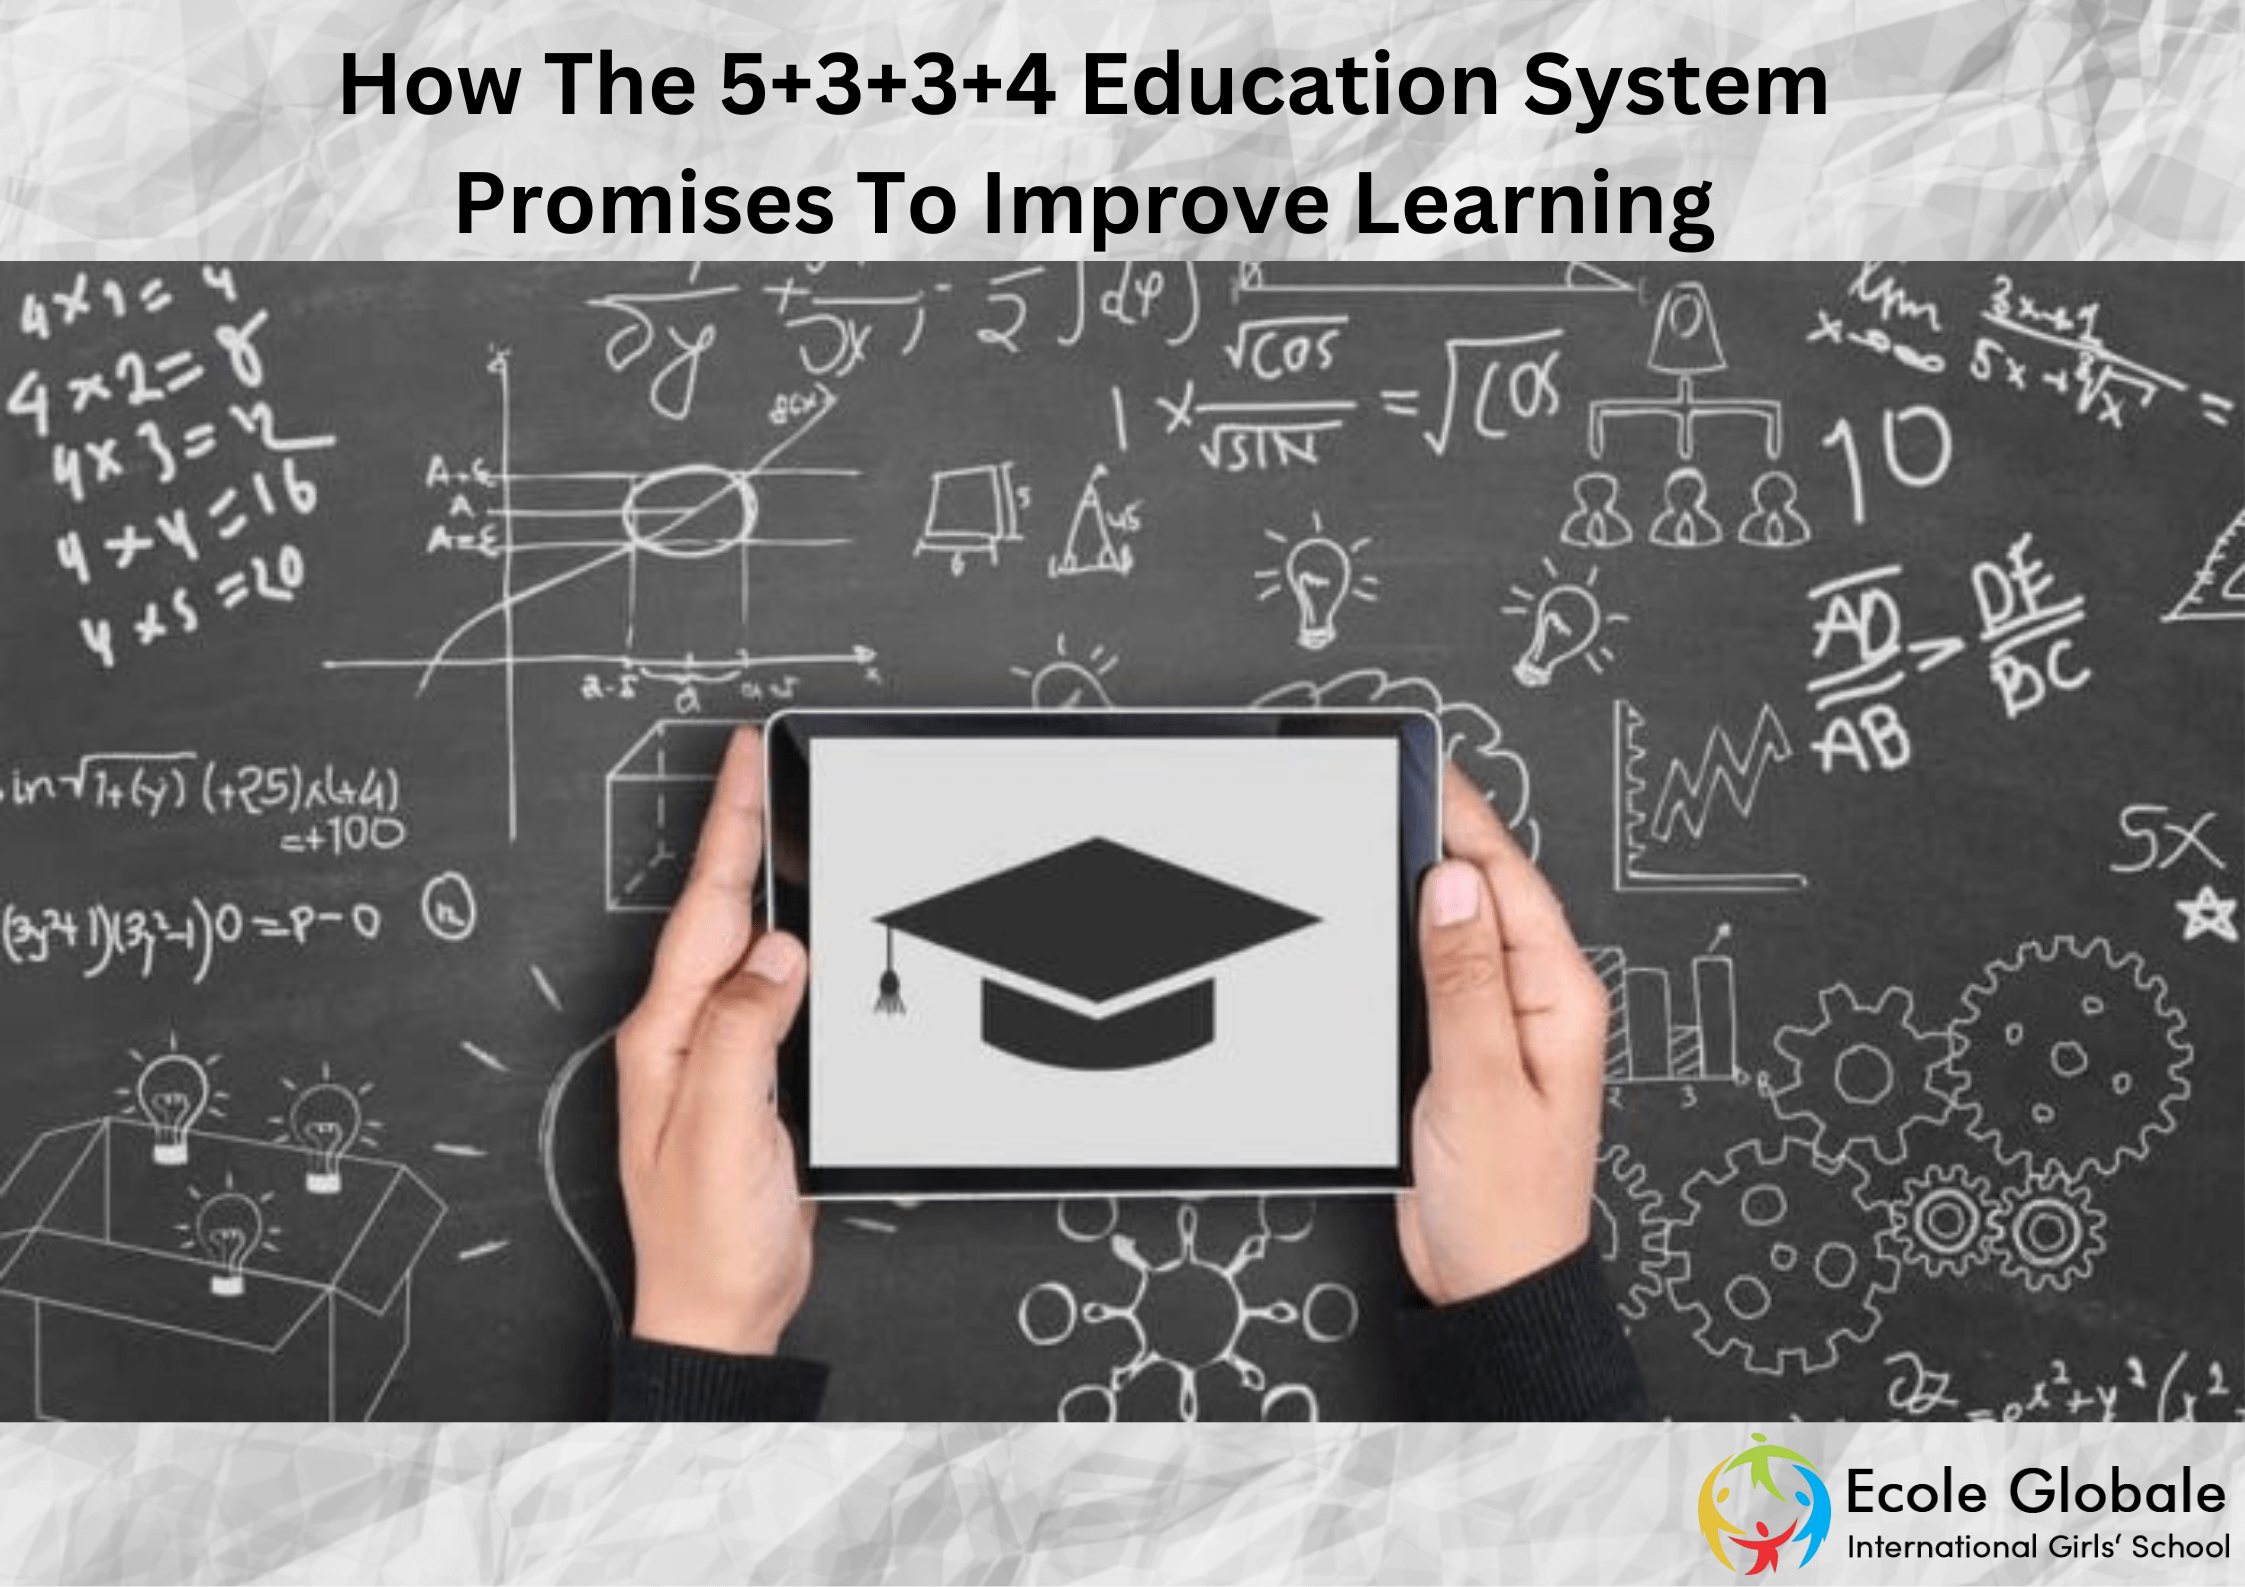 You are currently viewing How The 5+3+3+4 Education System Promises To Improve Learning